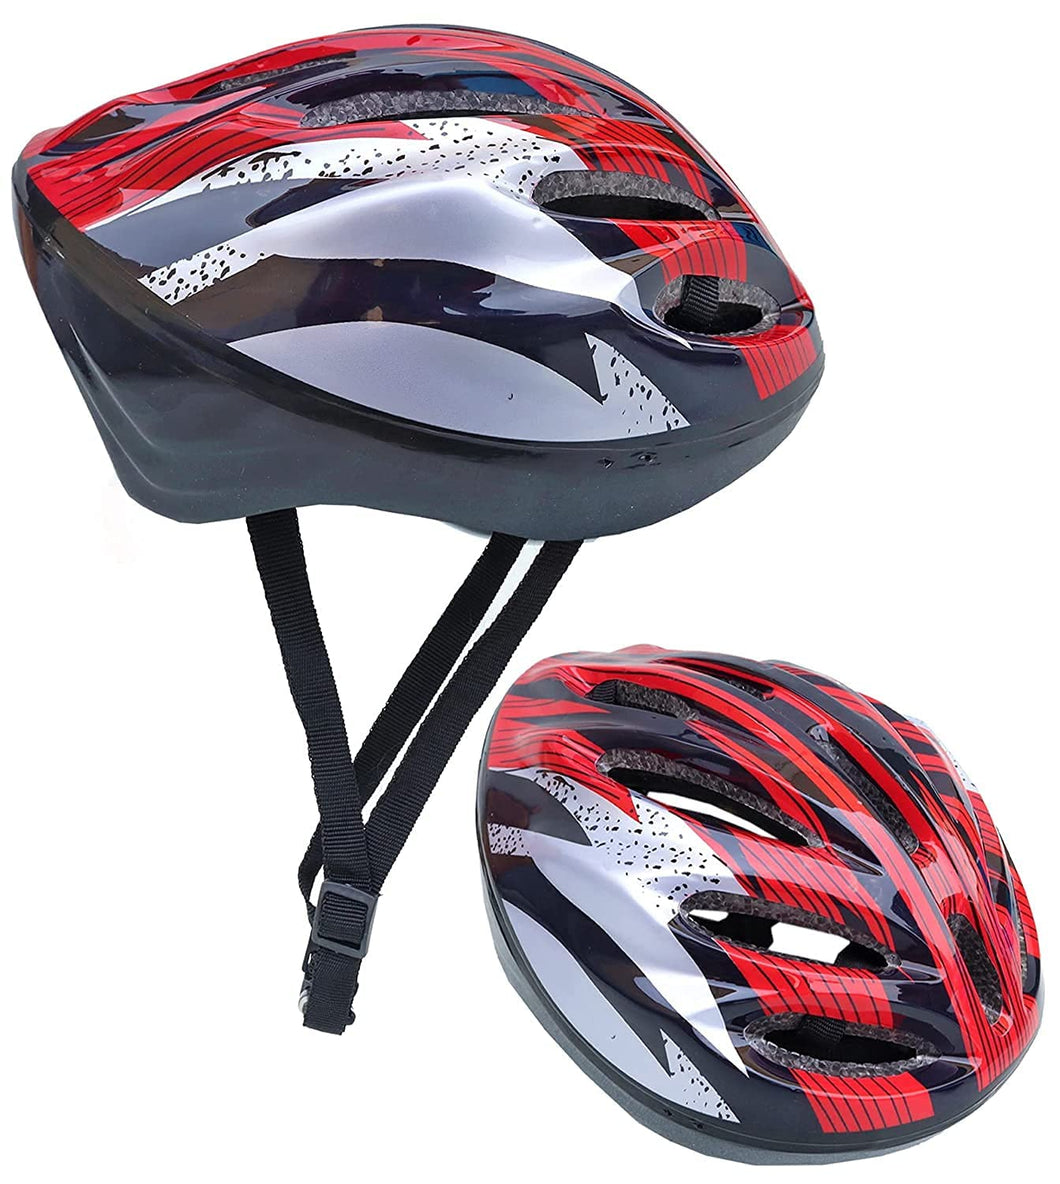 Toyshine Adults Bike Helmet with Visor Bicycle Helmet with Rear Light Size L (16CMX15CM) Inner Size, Color May Vary - SSTP (Model - C) (TS-2022)